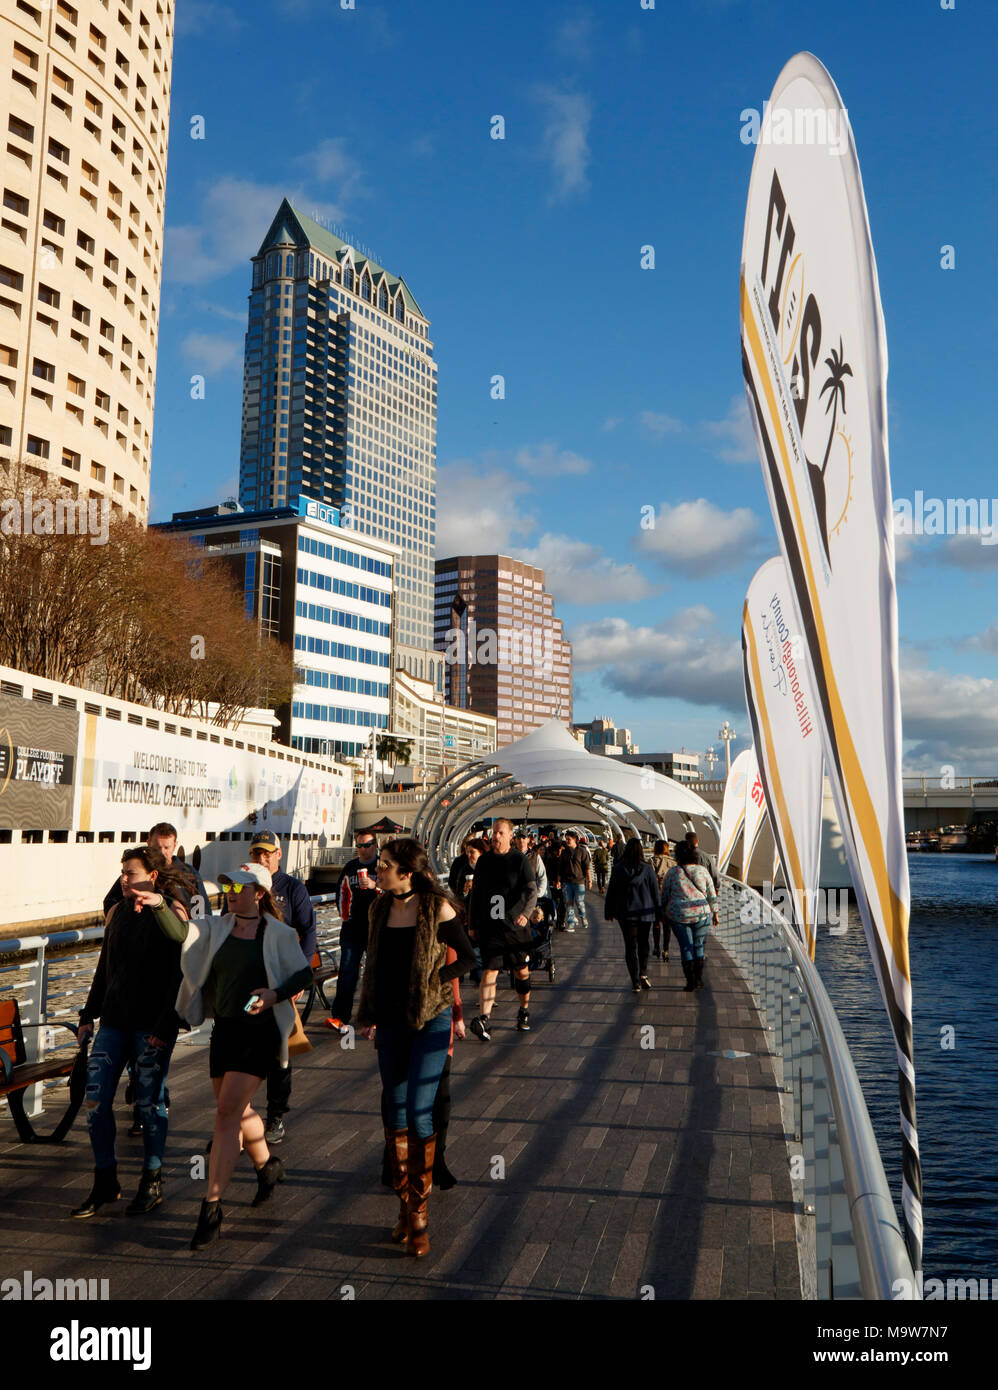 Visitors walk the Tampa Riverwalk over the Hillsborough River during the 2017 College Football Playoff celebrations in Tampa, Florida. Stock Photo